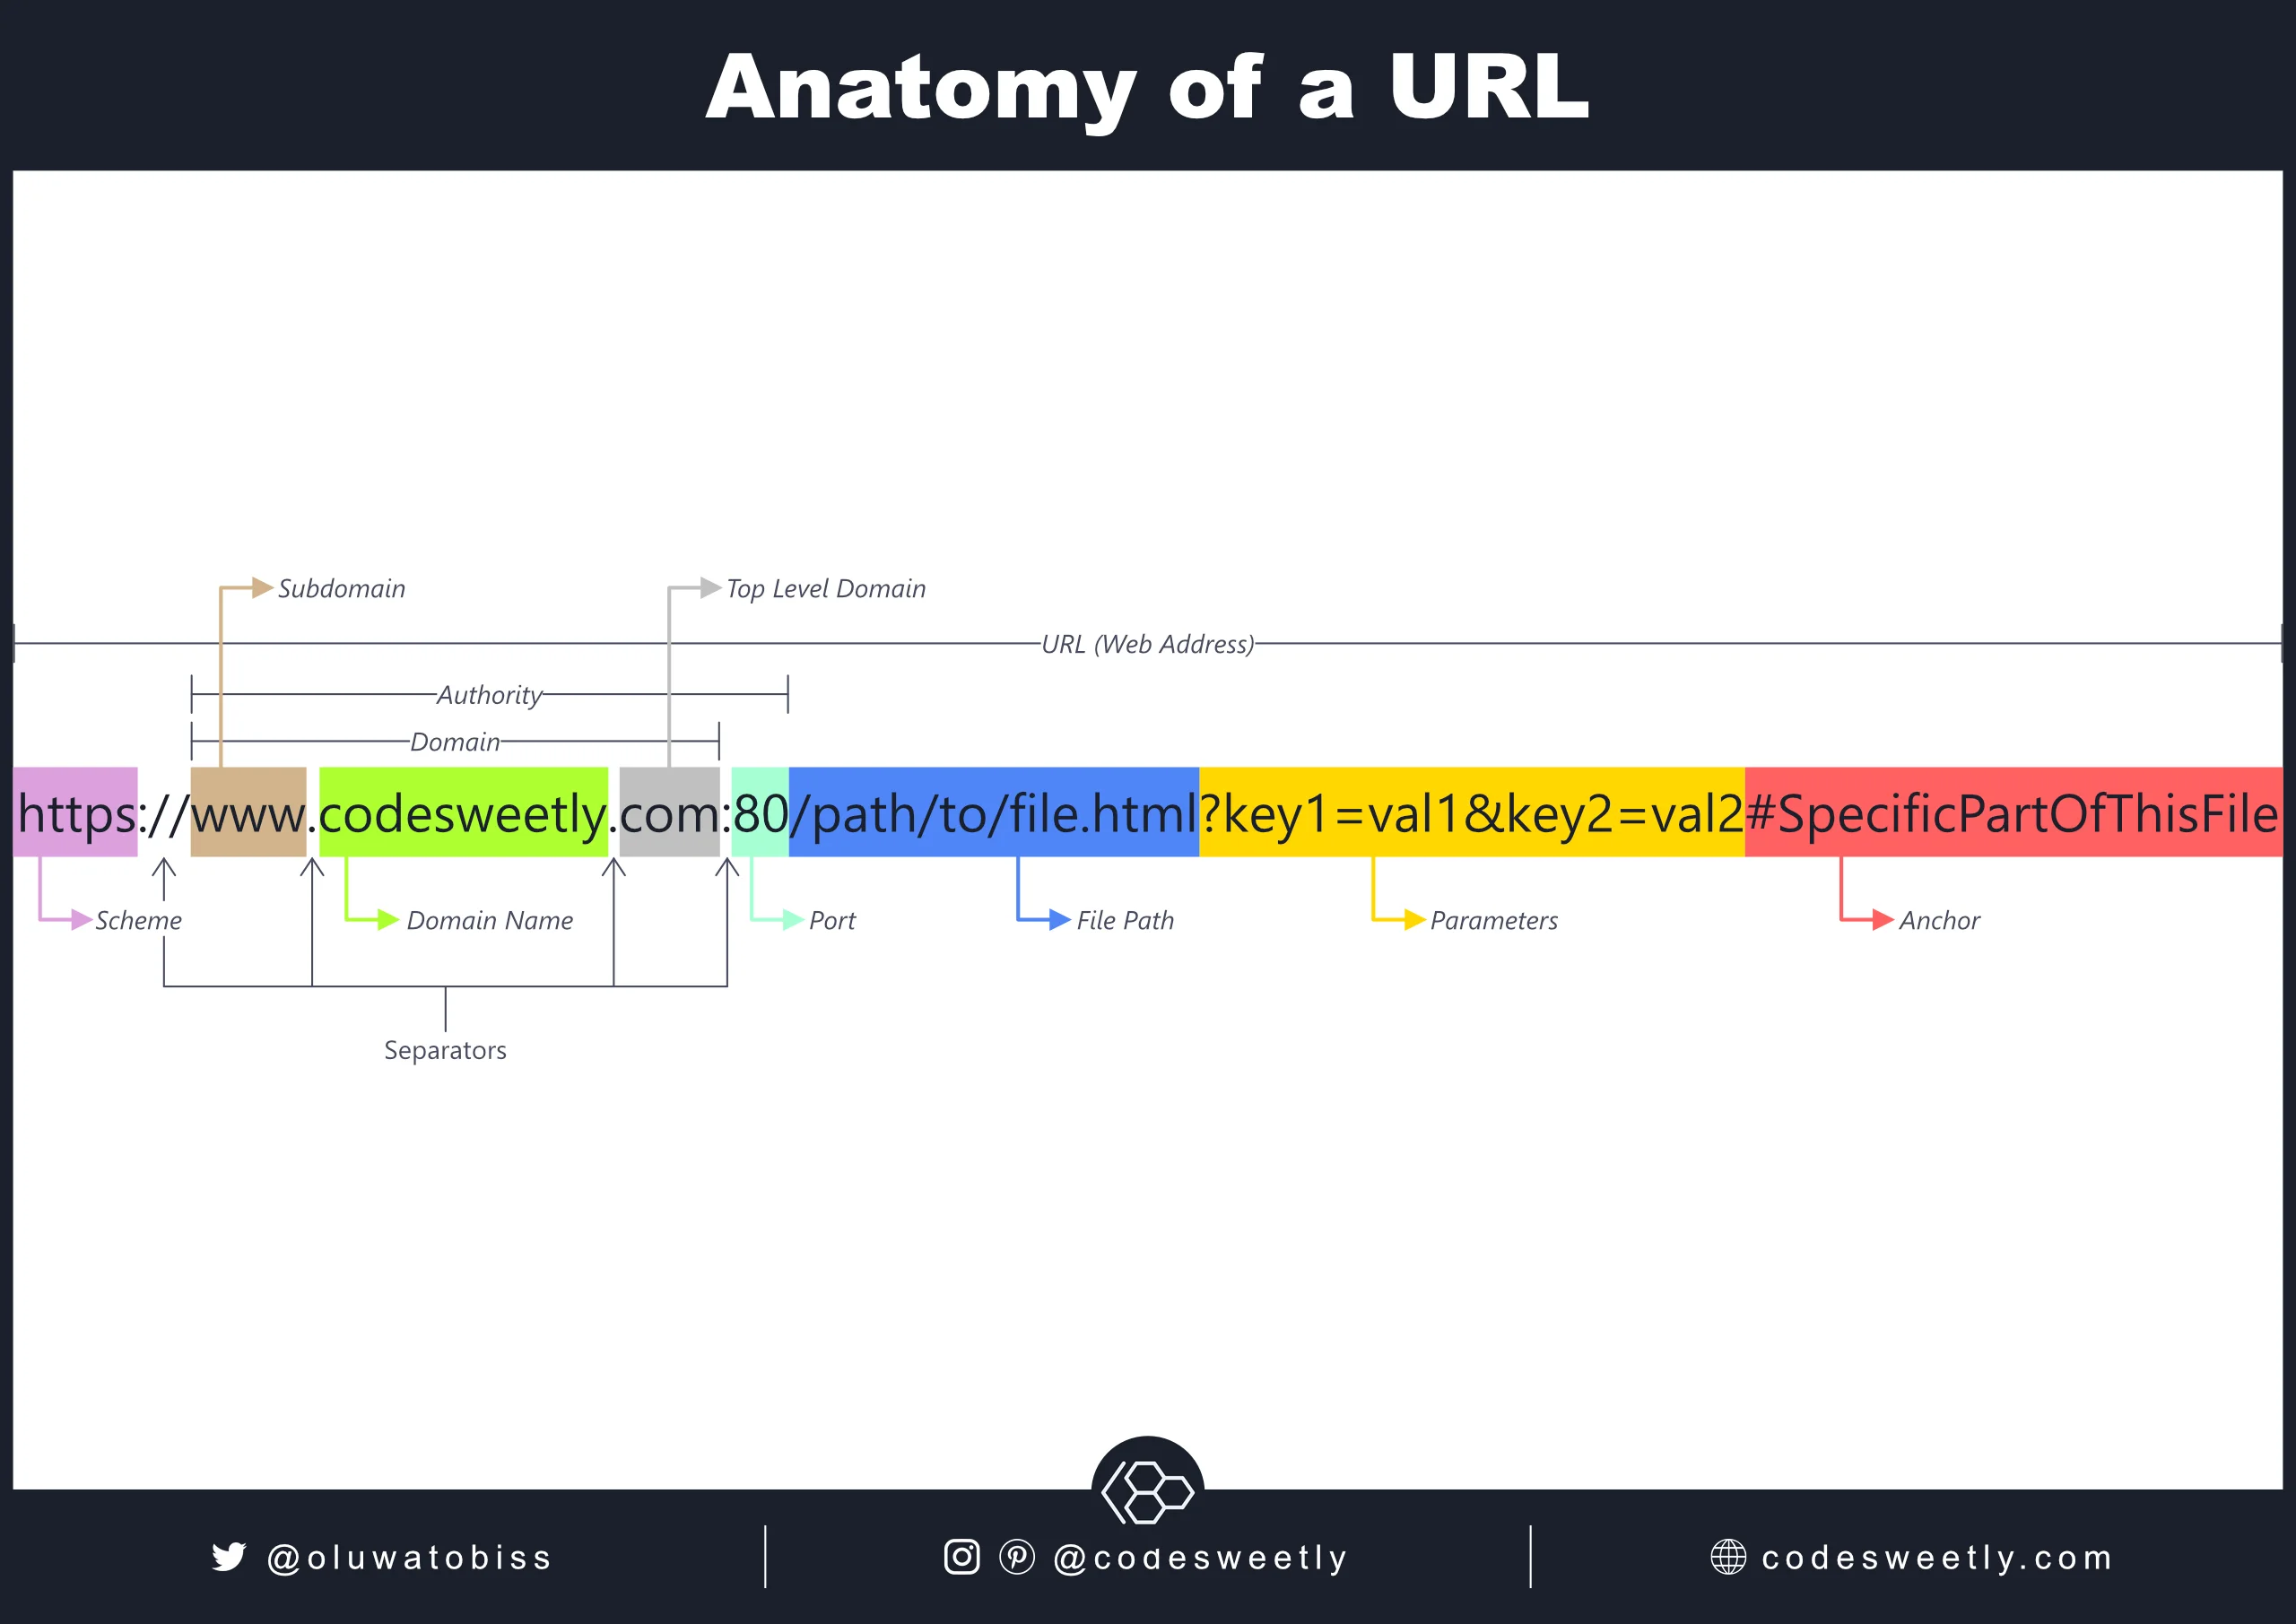 A URL consists of a scheme, domain, port, file path, one or more parameters, and an anchor